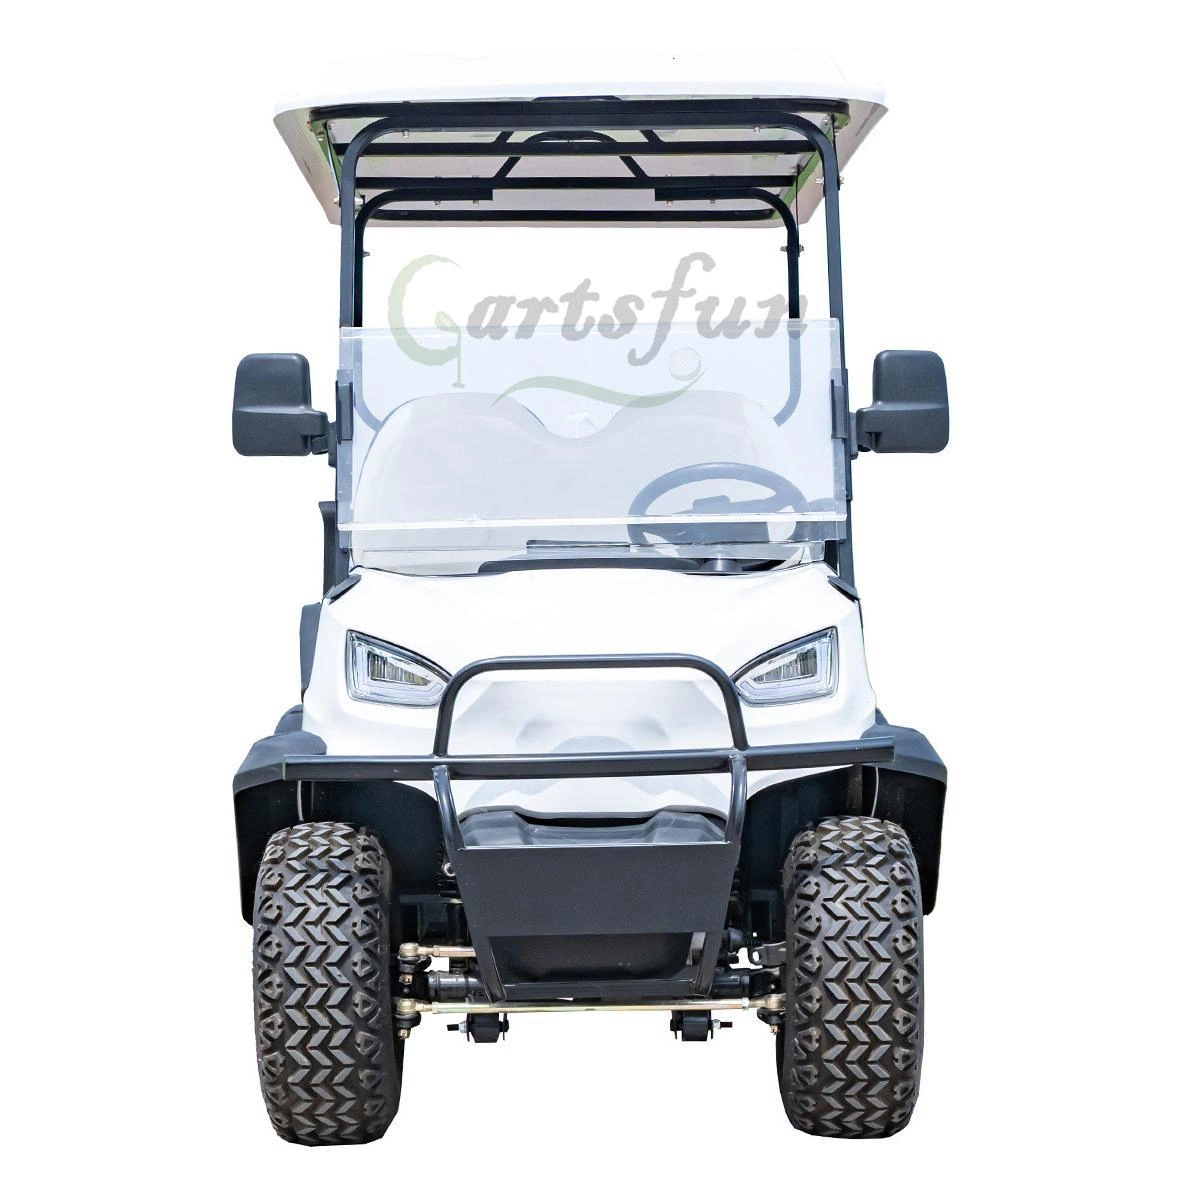 Lower Price 48V 4 Seat Sightseeing Bus Electric Golf Buggy Club Cart